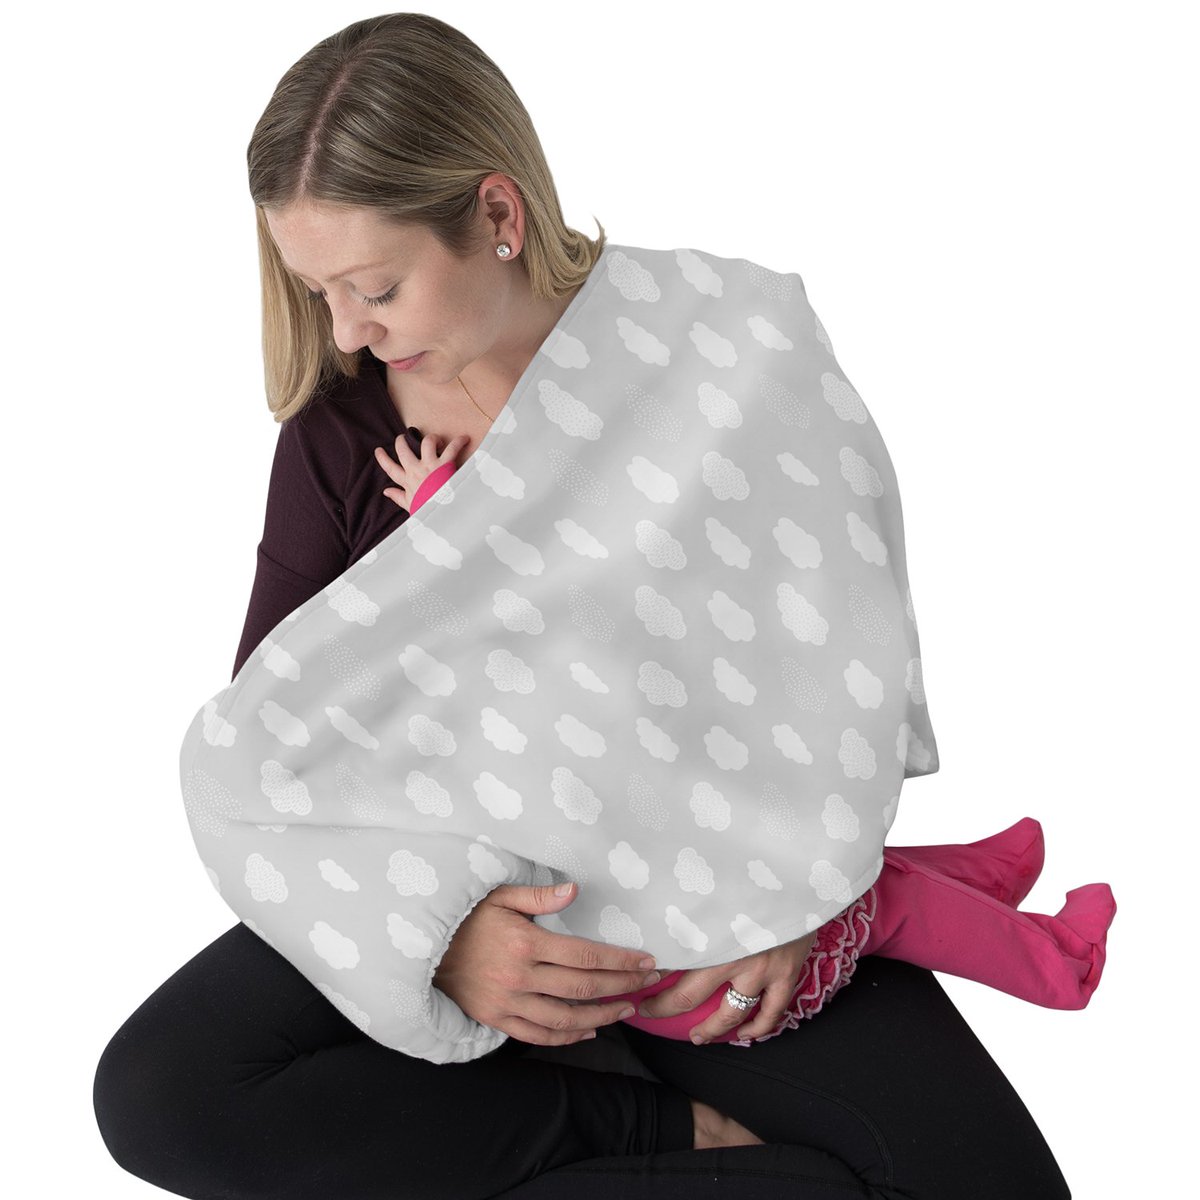 A GoPillow is a:
▪Wearable cradle pillow
▪Breastfeeding pillow with built-in cover
▪Pillow and swaddling wrap for babies
▪Toddler pillow with an attached travel blanket
▪Travel pillow

Video: youtu.be/AIcX3Xo1iKY

Order: amazon.com/s/ref=nb_sb_no…

#NursingCover #BabyNursing